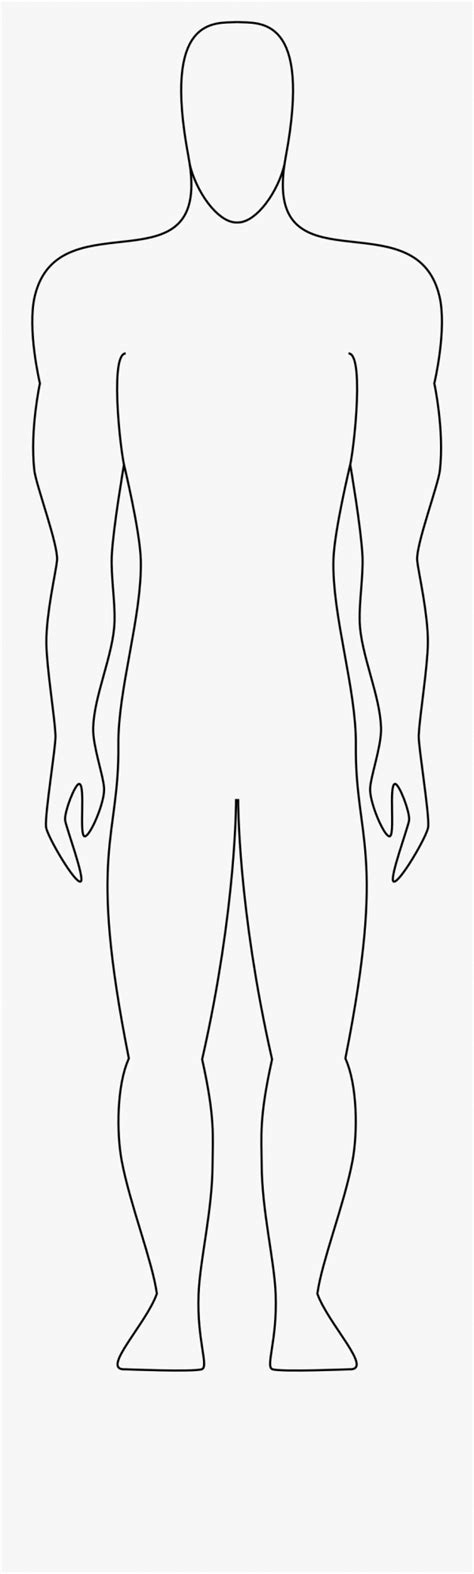 Body Outline Clipart Human And Other Clipart Images On Cliparts Pub